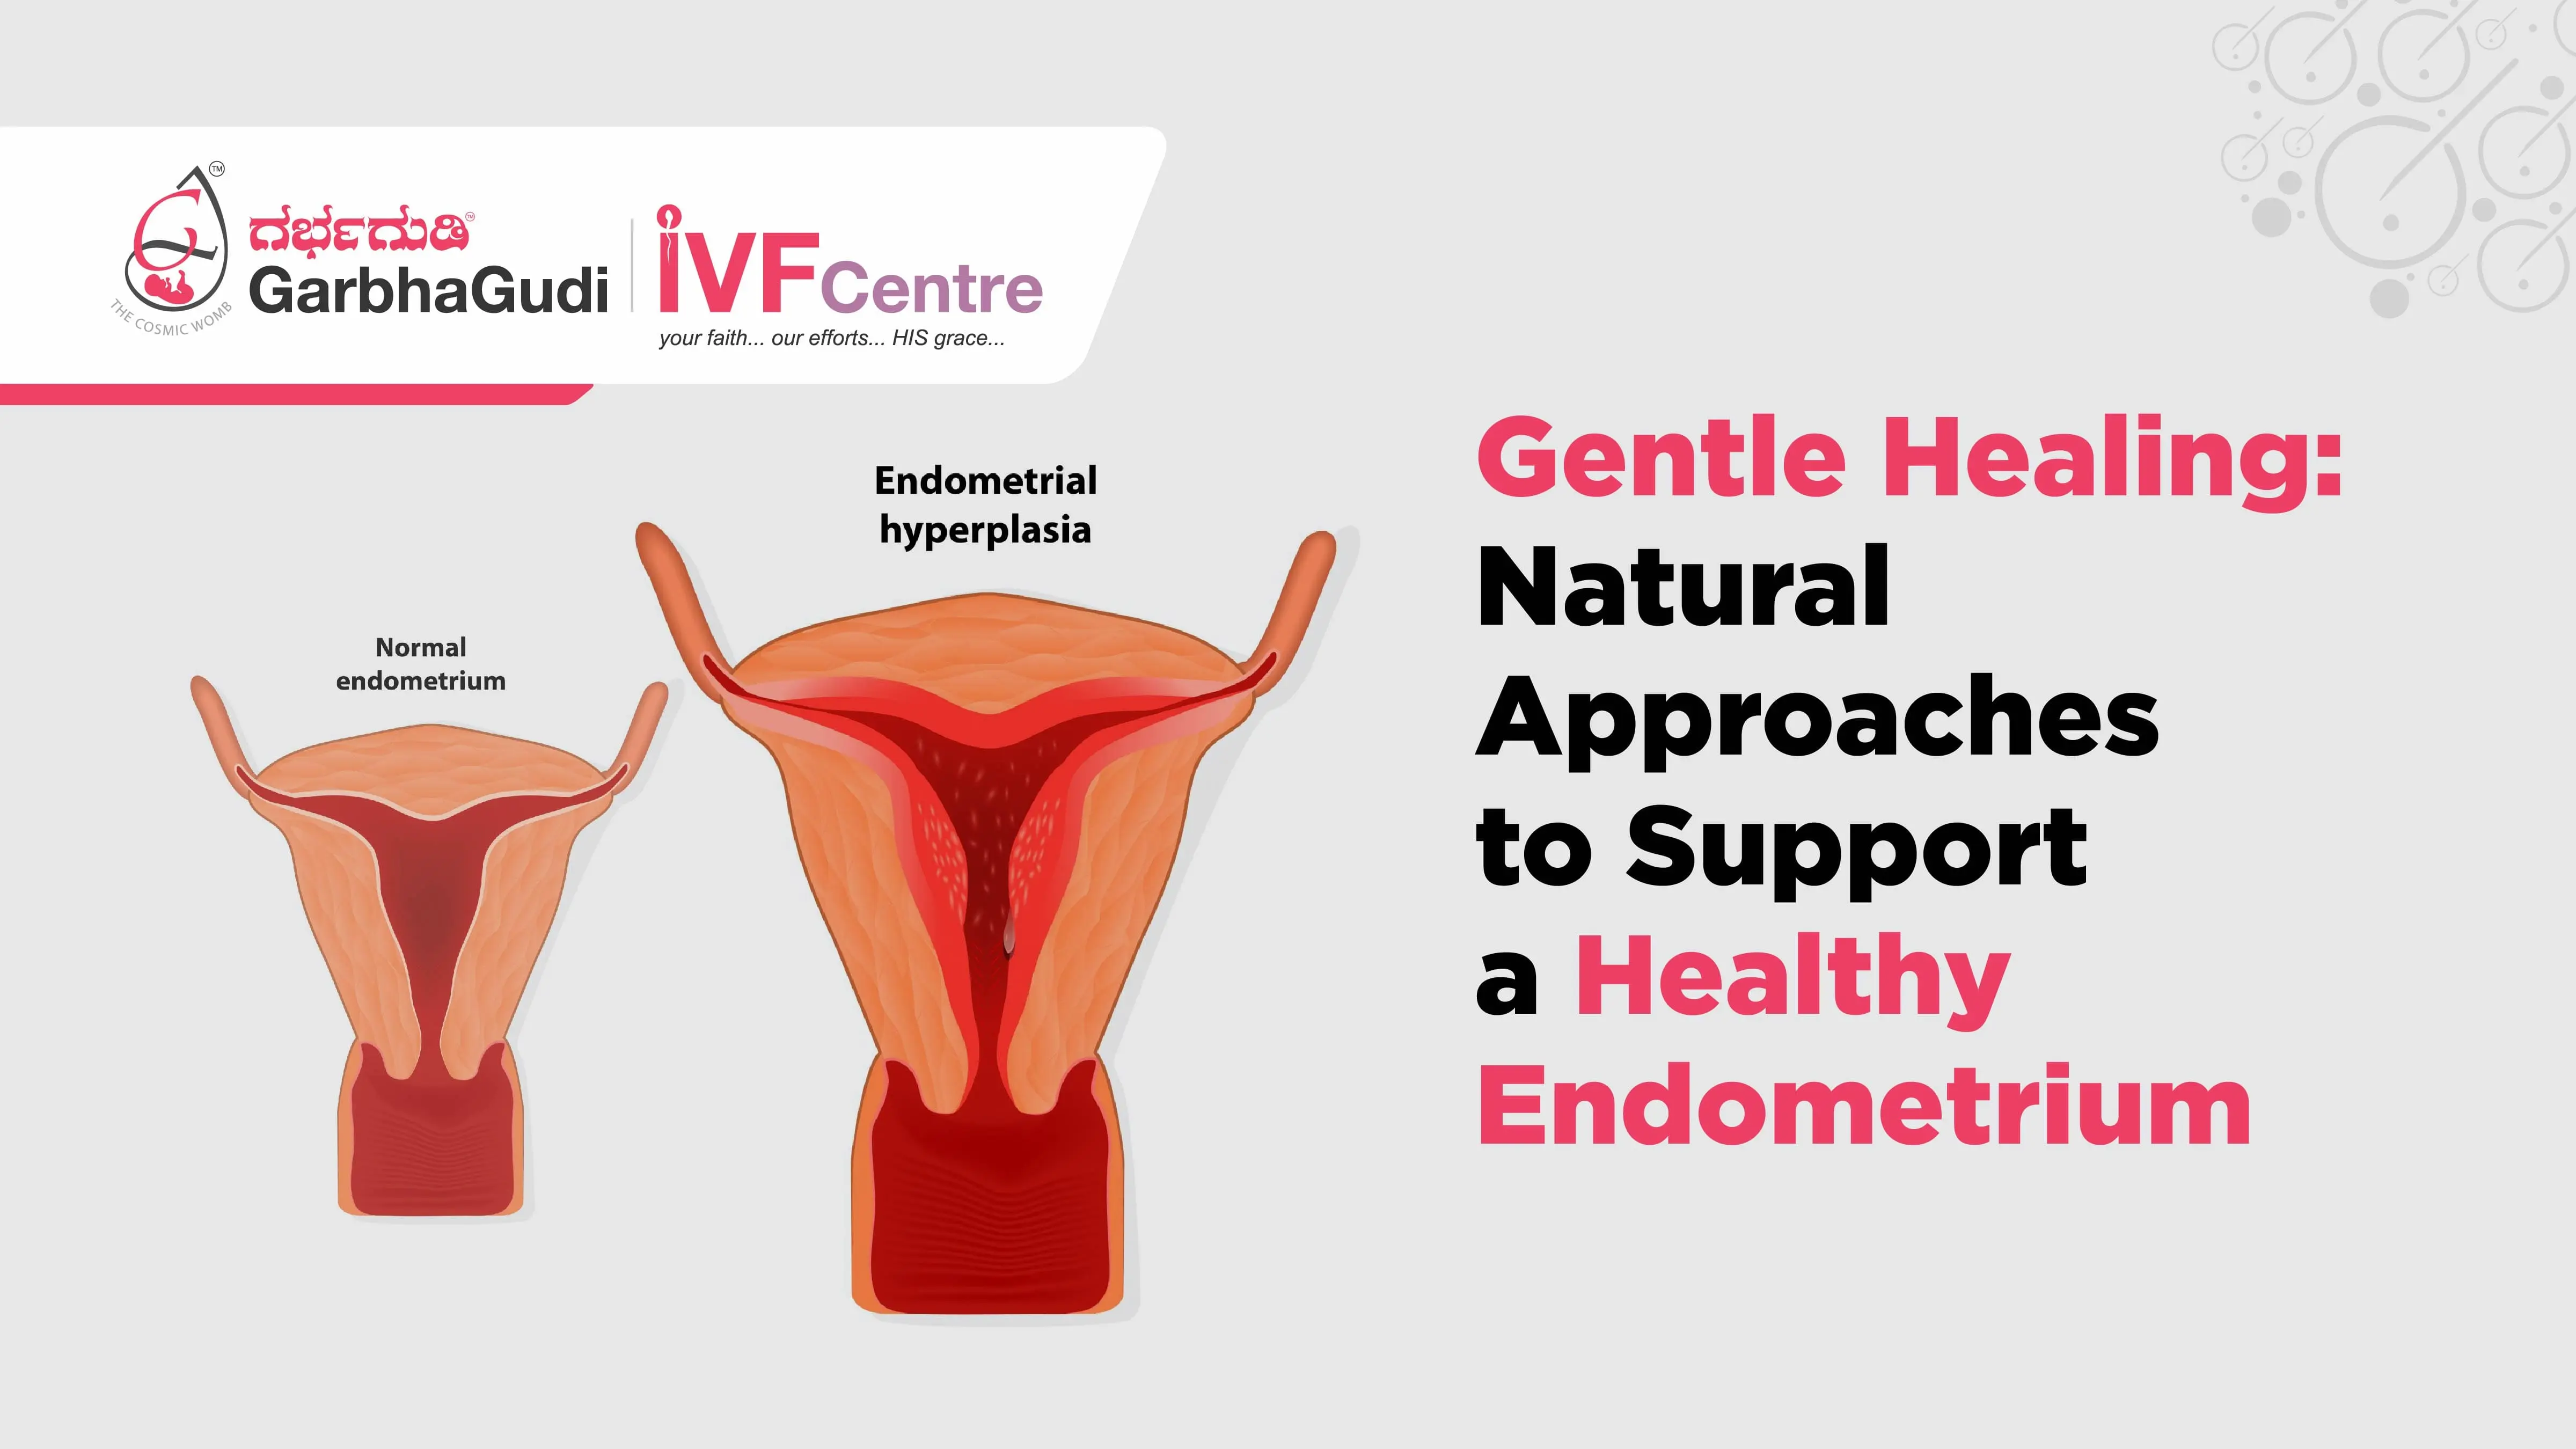 Gentle Healing: Natural Approaches to Support a Healthy Endometrium